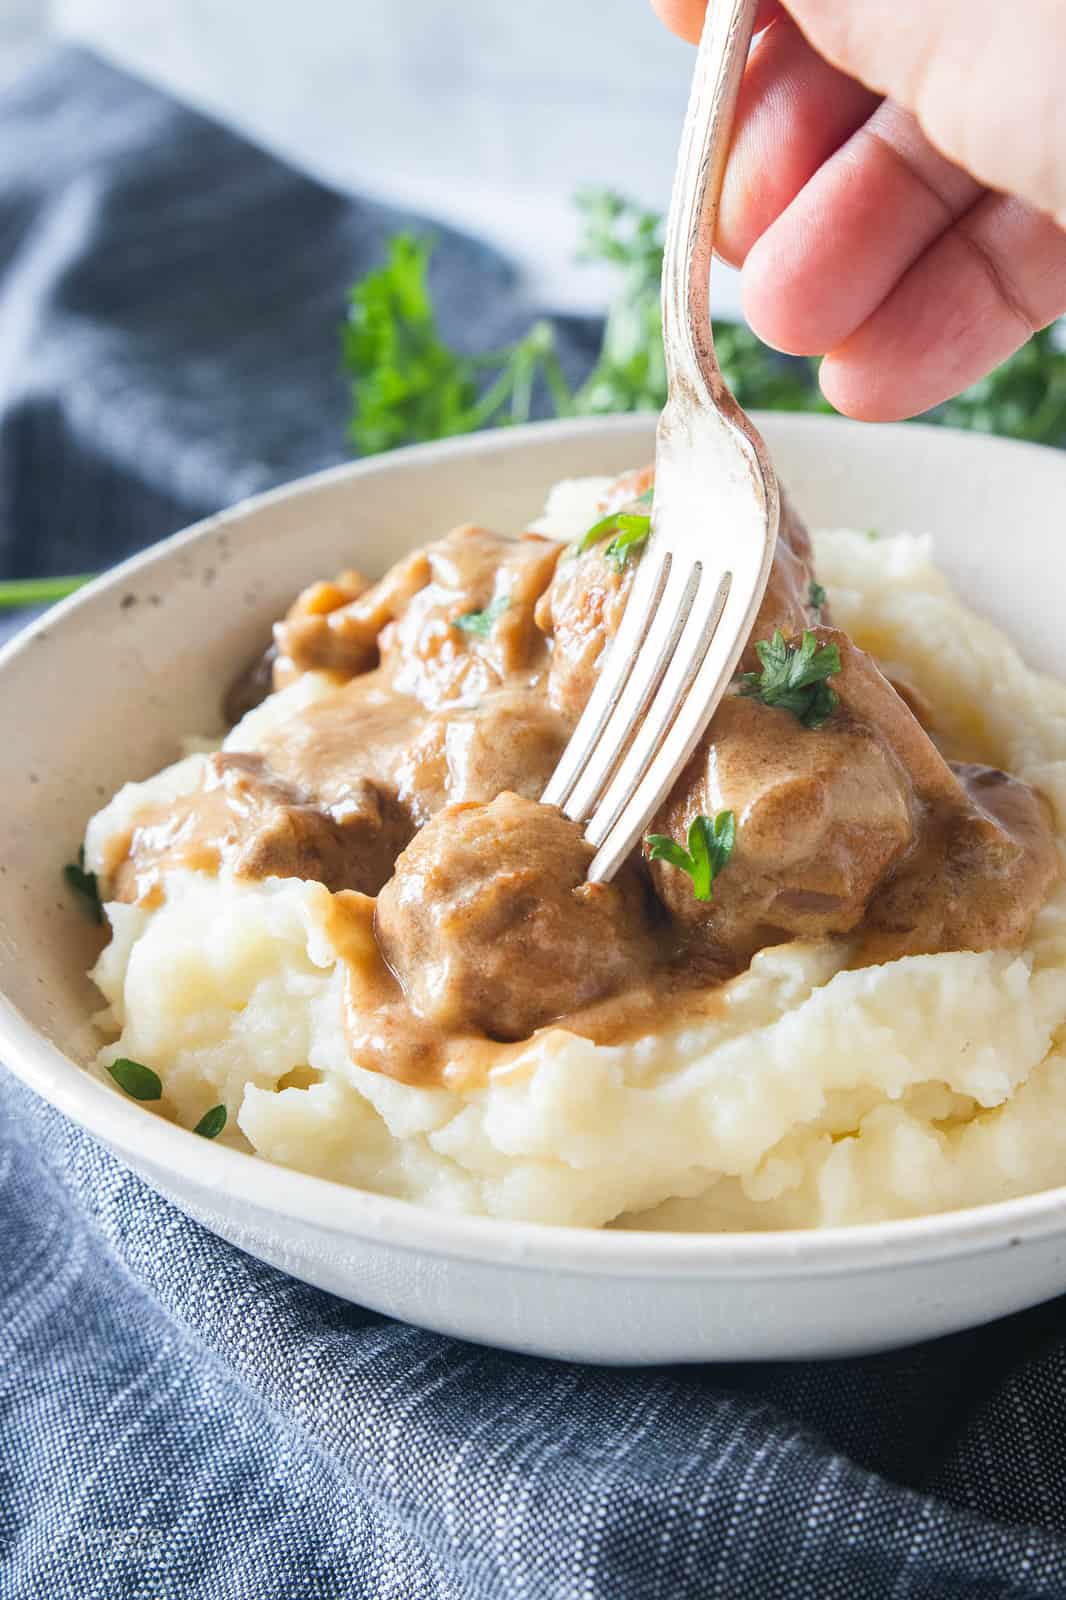 swedish meatballs on top of mashed potatoes in a bowl